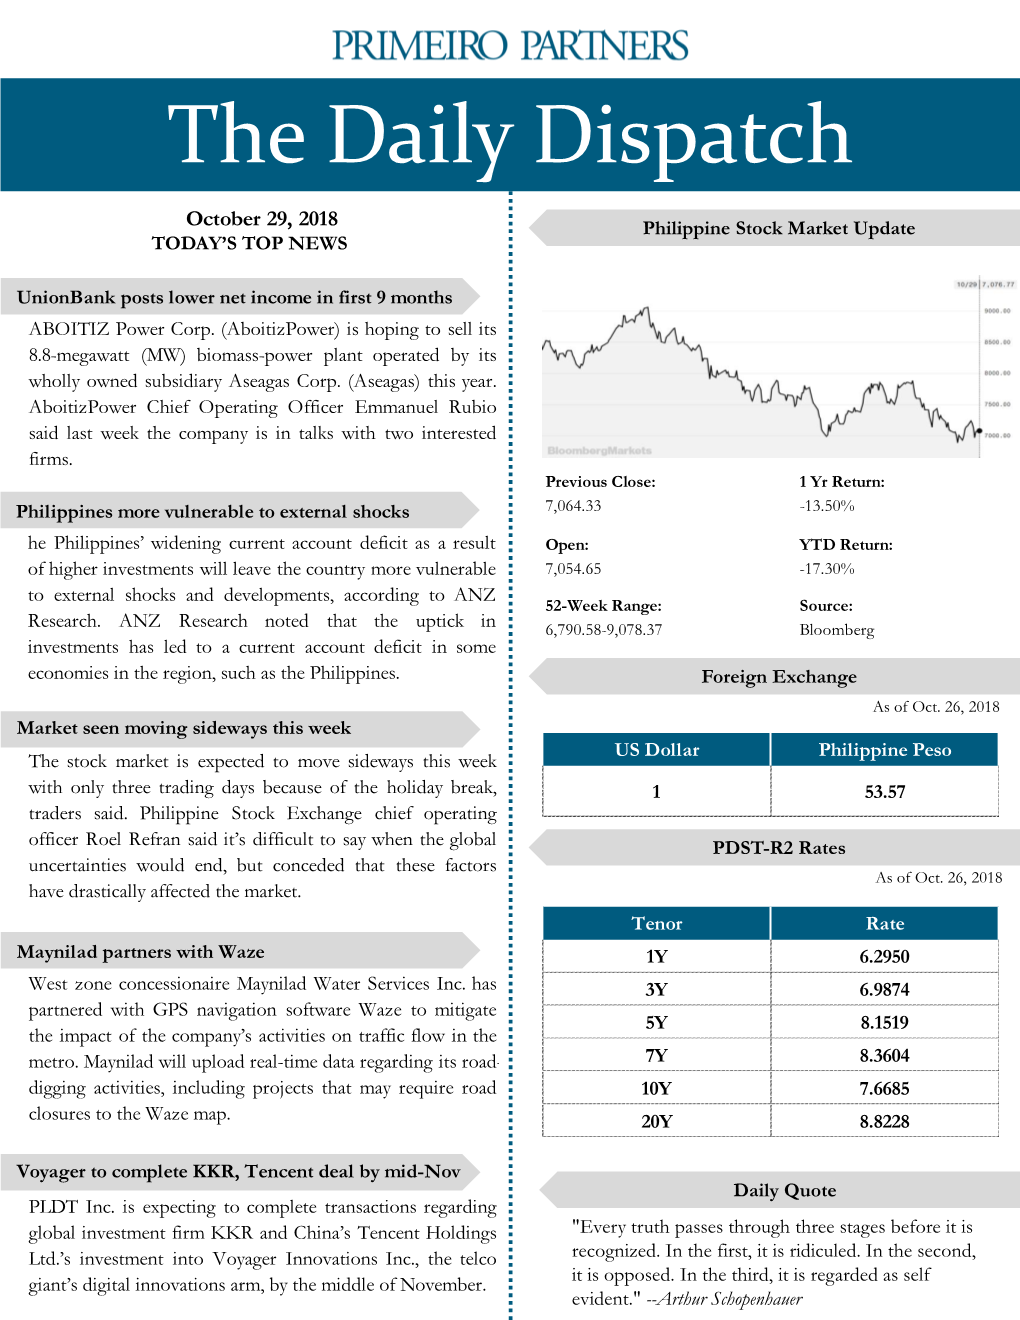 The Daily Dispatch